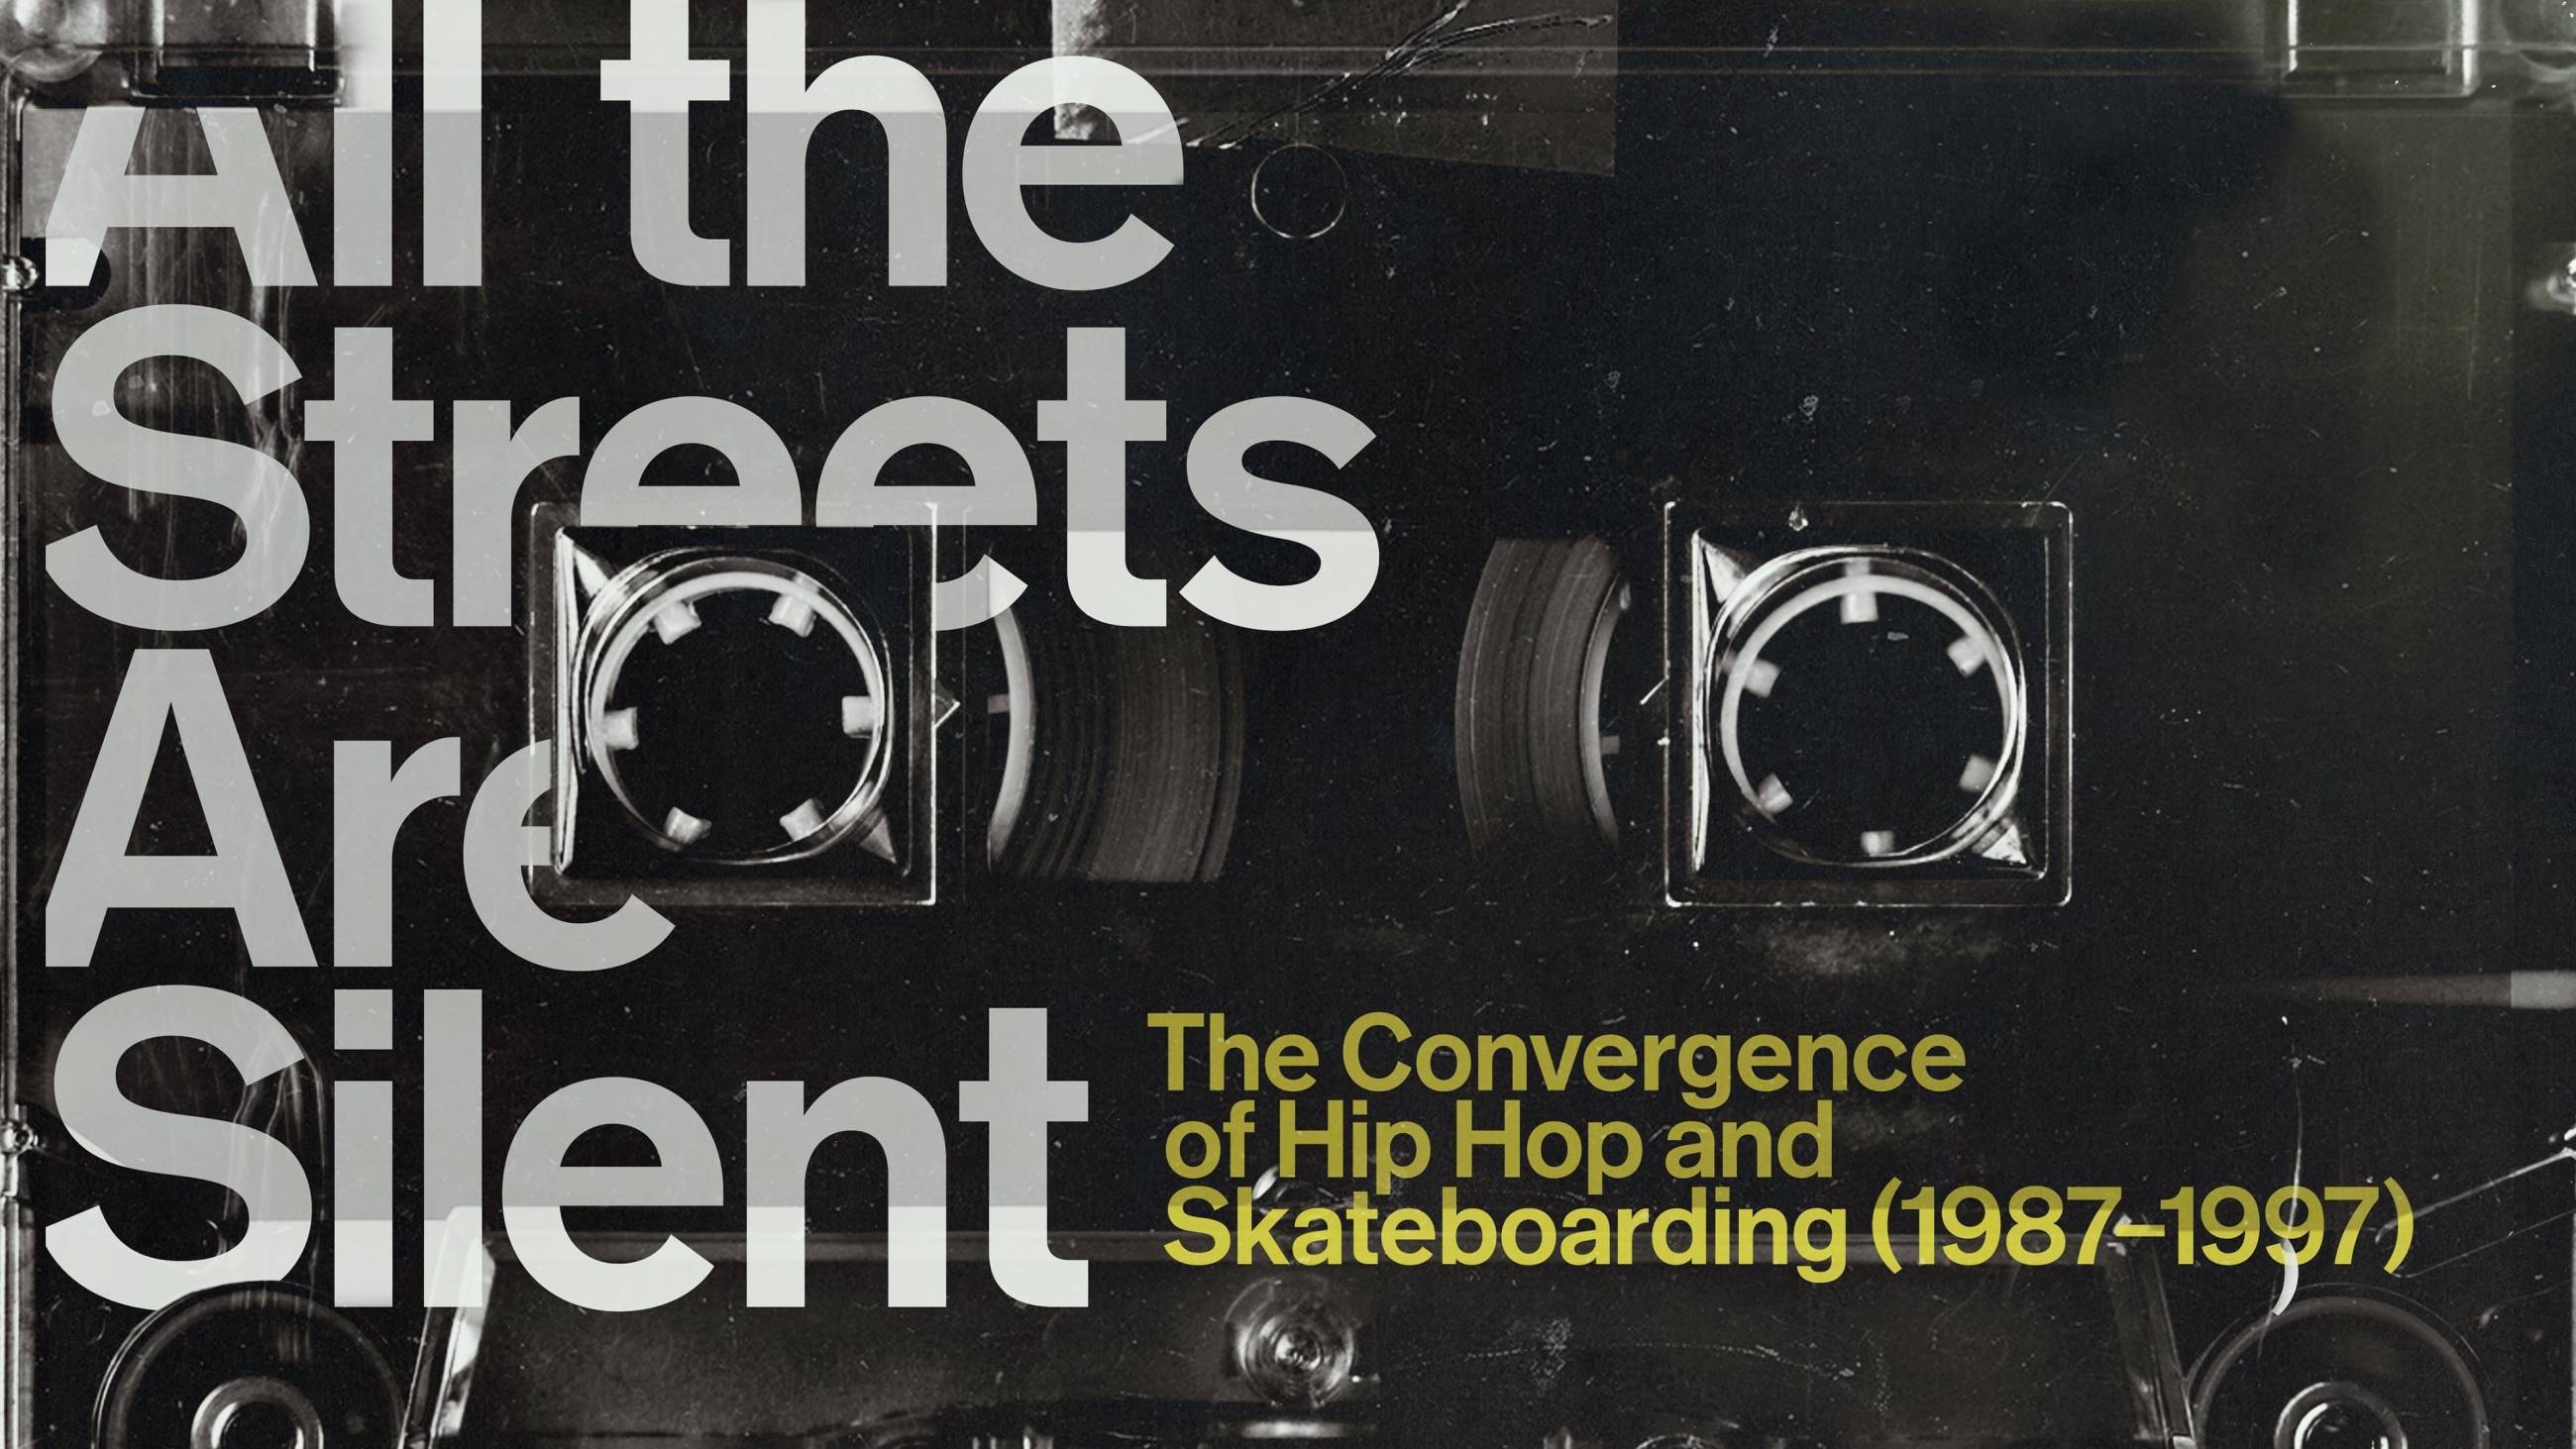 Cubierta de All the Streets Are Silent: The Convergence of Hip Hop and Skateboarding (1987-1997)